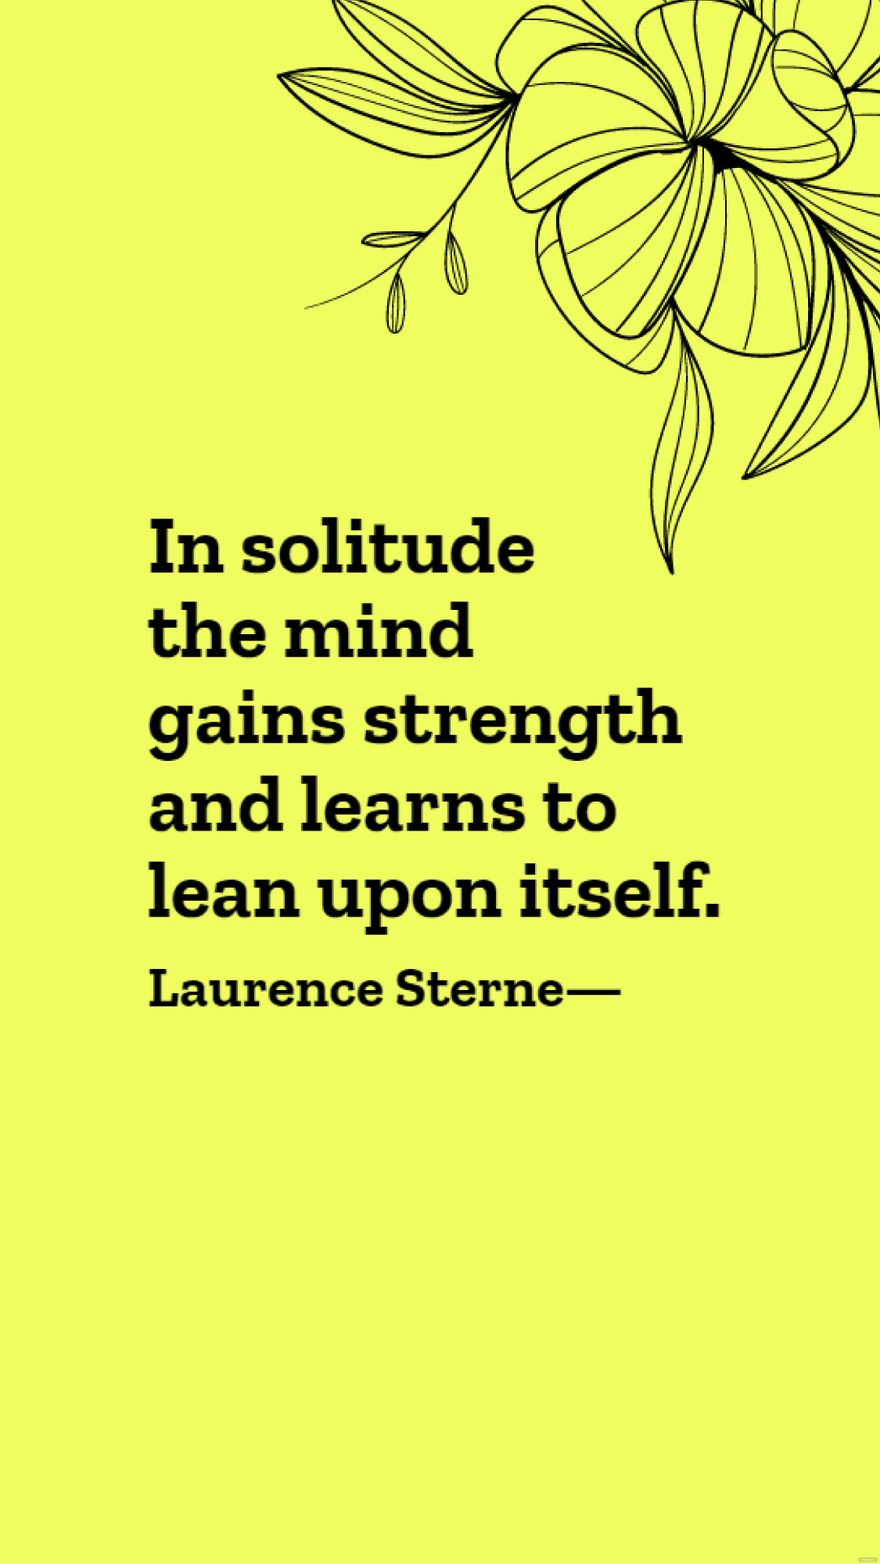 Free Laurence Sterne - In solitude the mind gains strength and learns to lean upon itself. in JPG